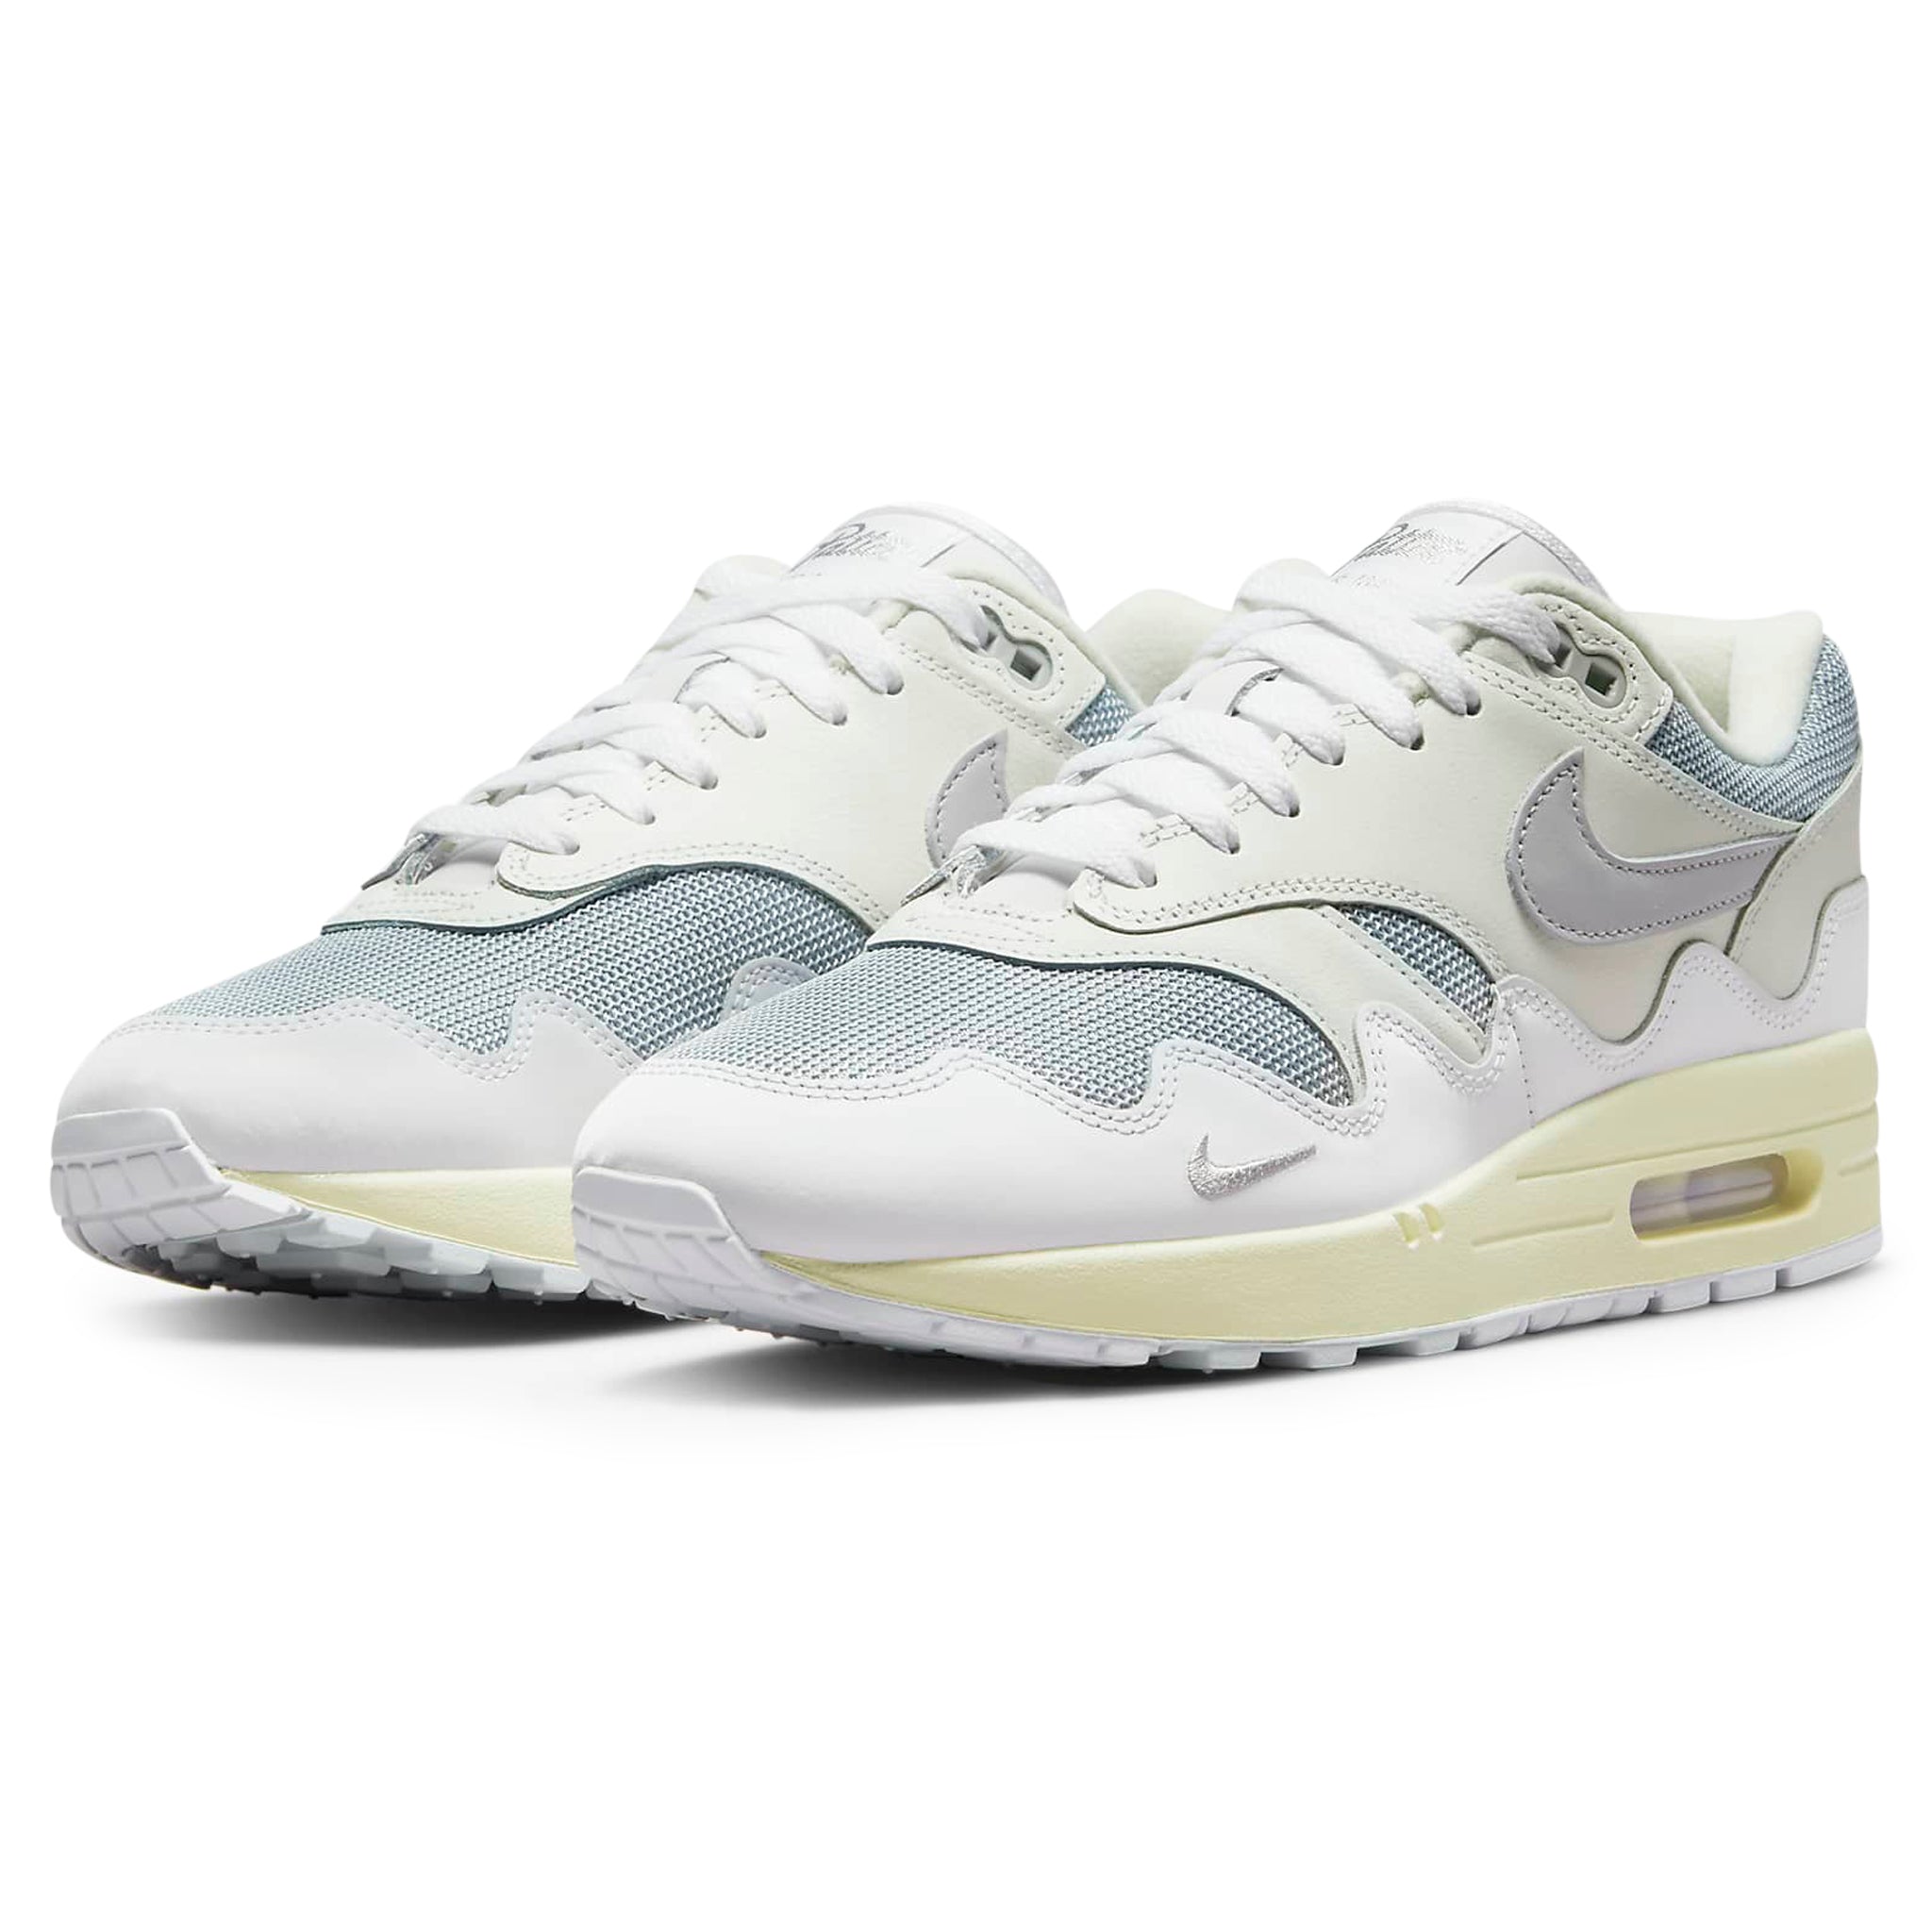 Front side view of Nike Air Max 1 Patta Waves White DQ0299-100